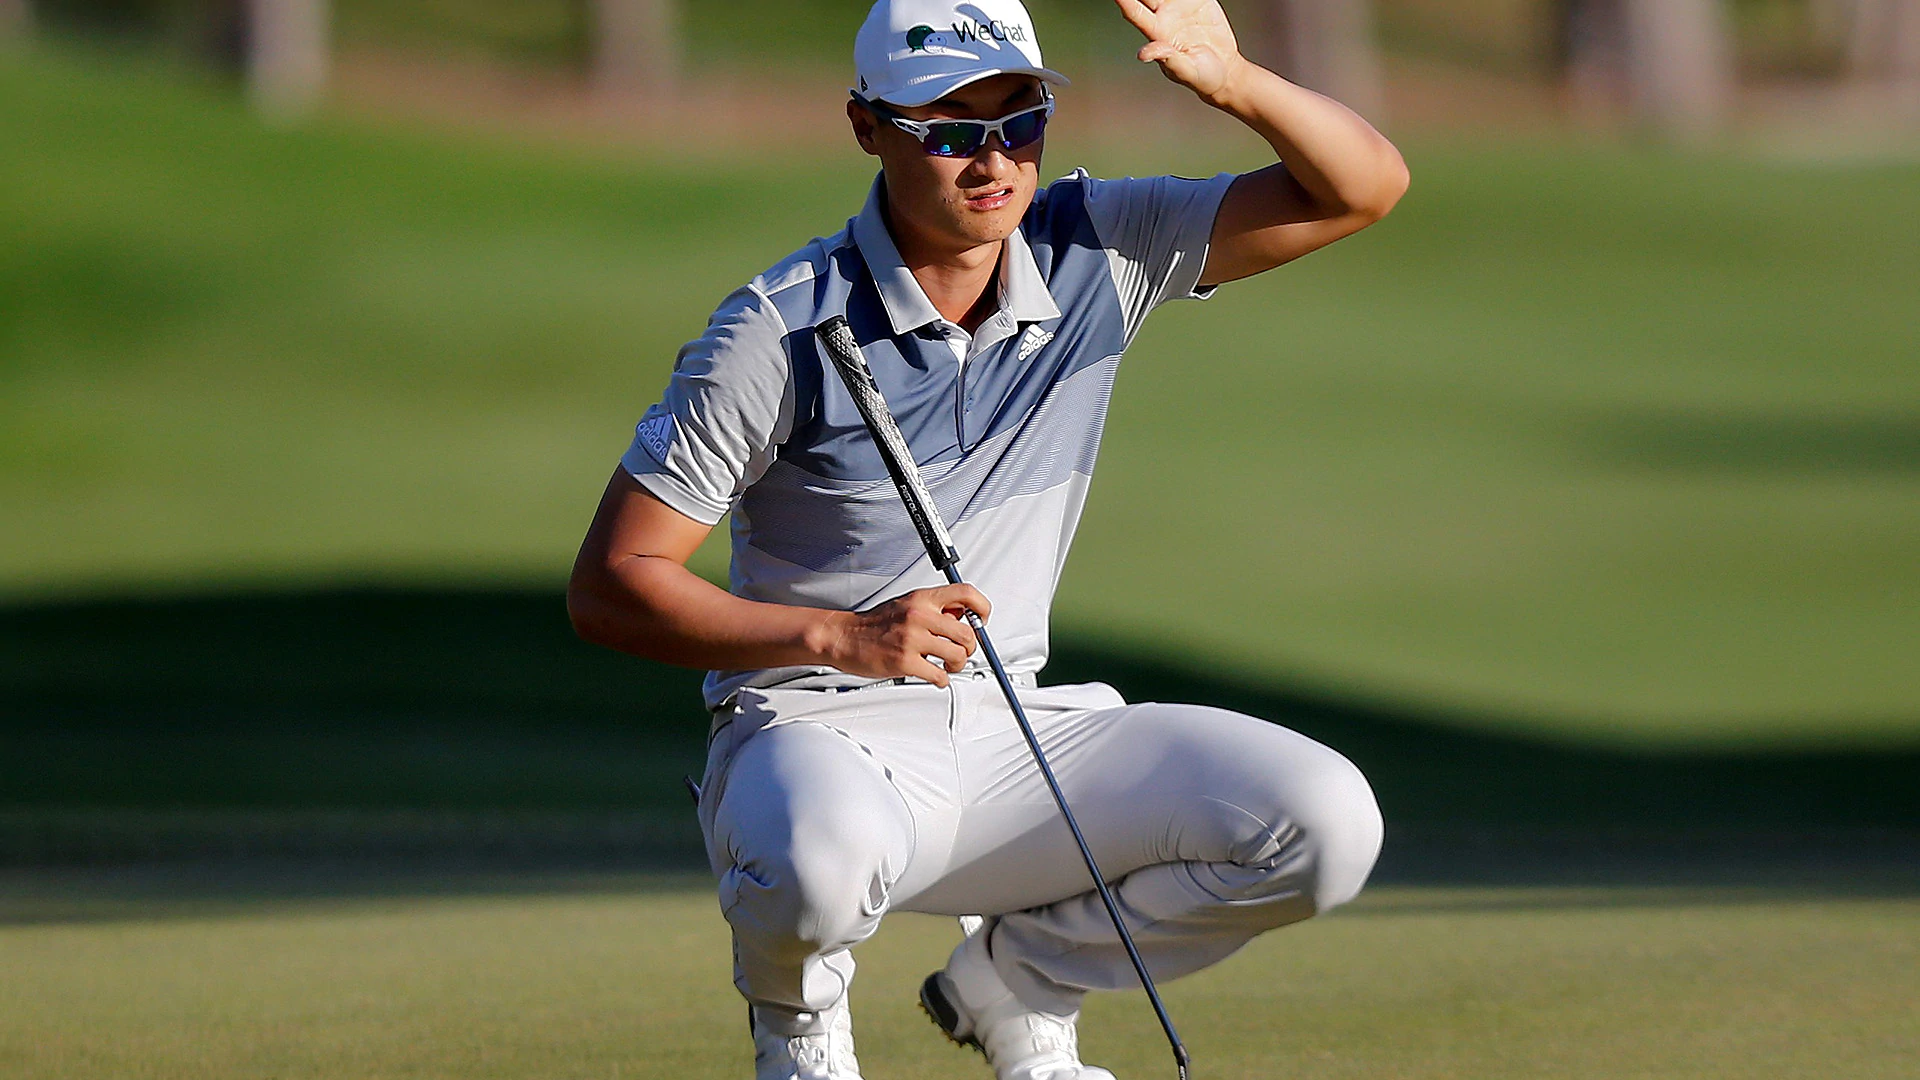 Li penalized 2 shots in Dubai after caddie helps with alignment